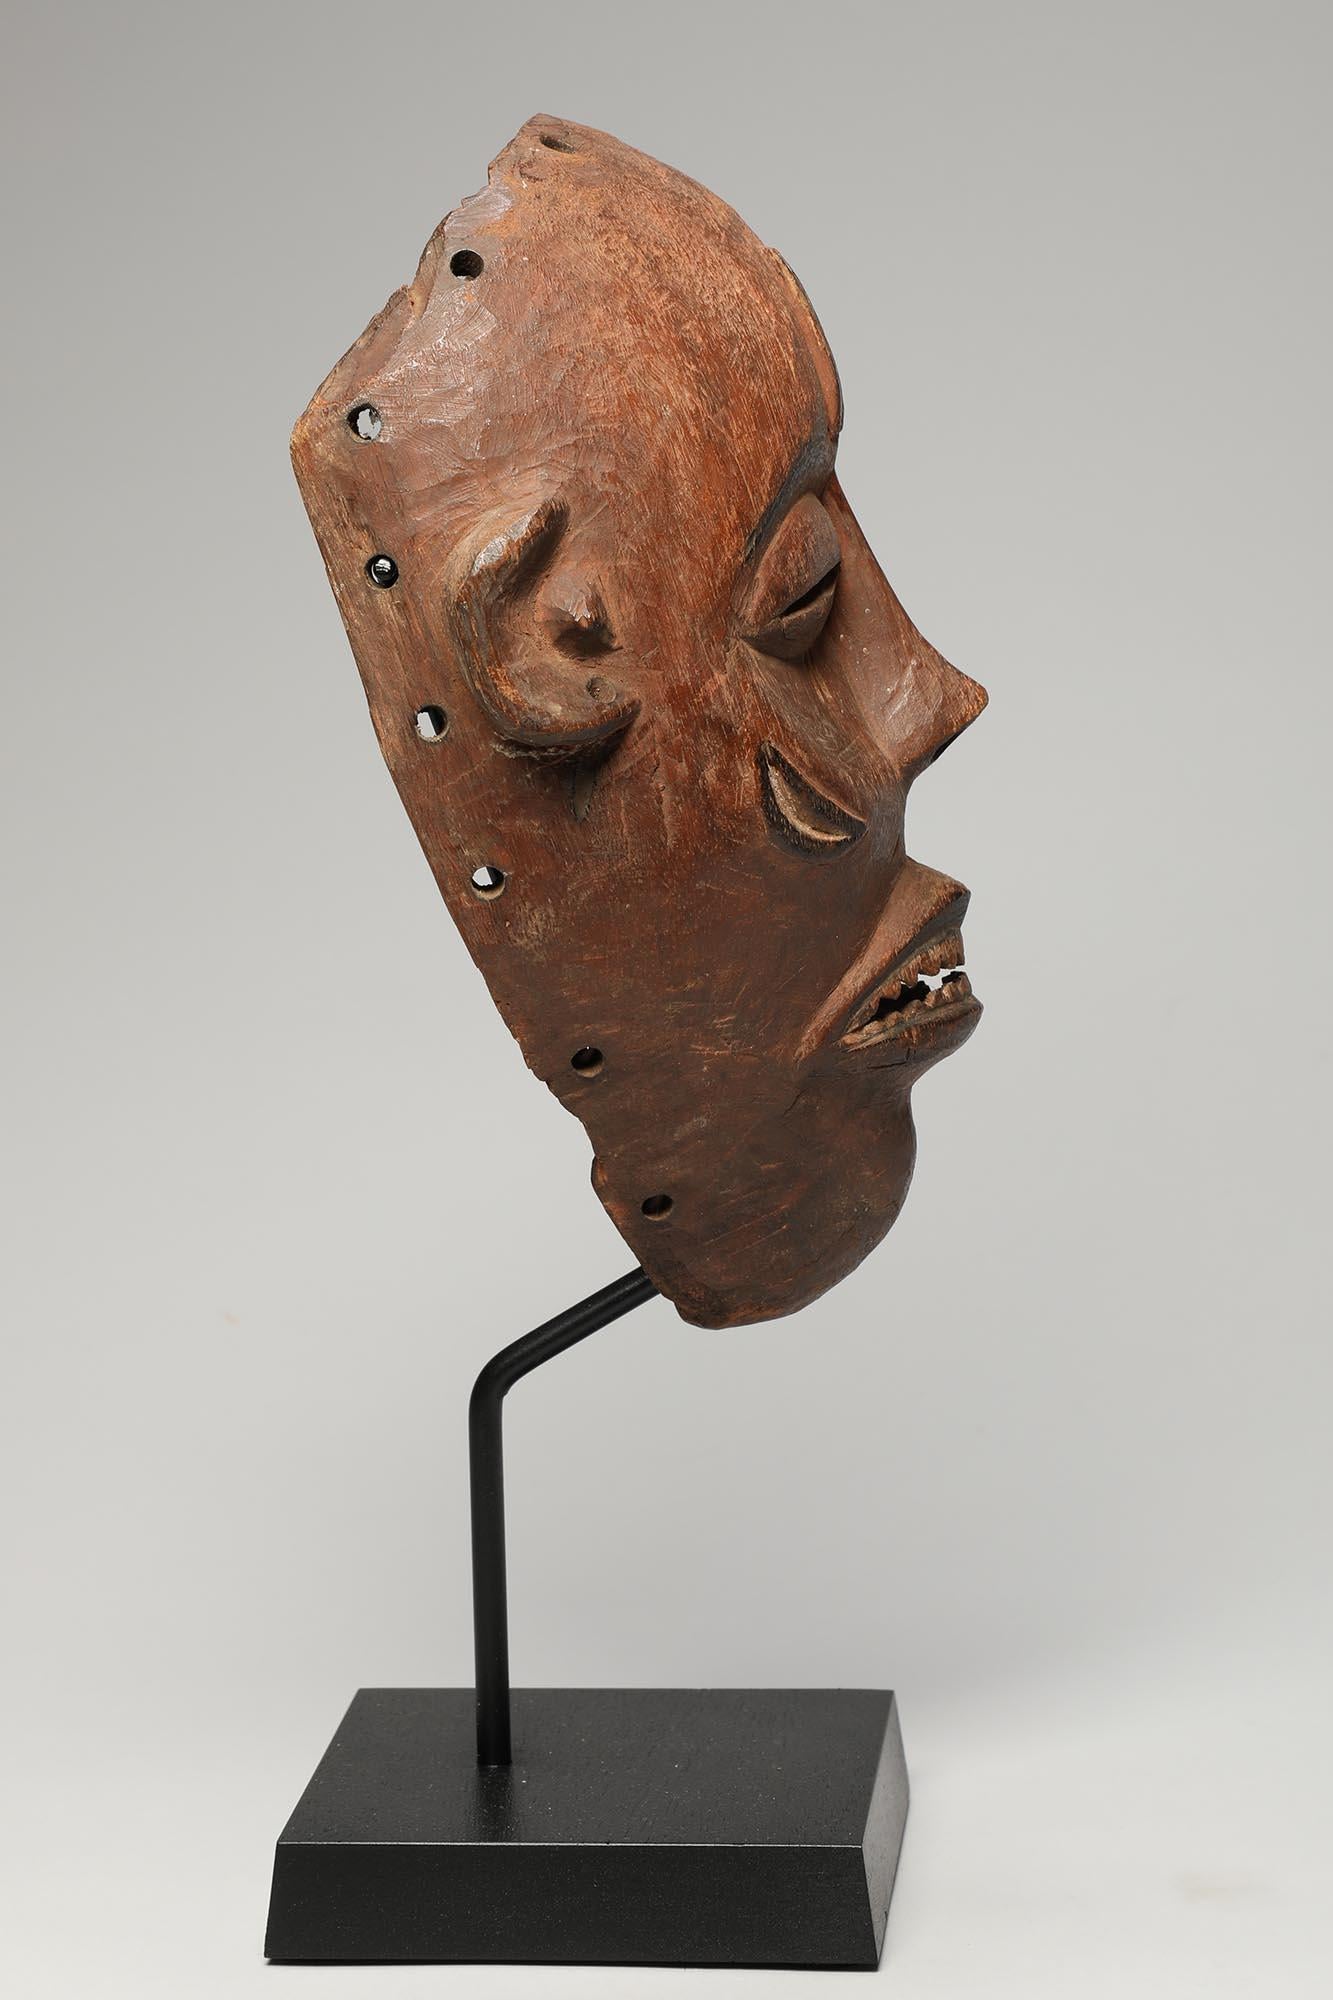 Wood Early Hardwood Pende Dance Mask Early 20th Century DR Congo African Tribal Art For Sale